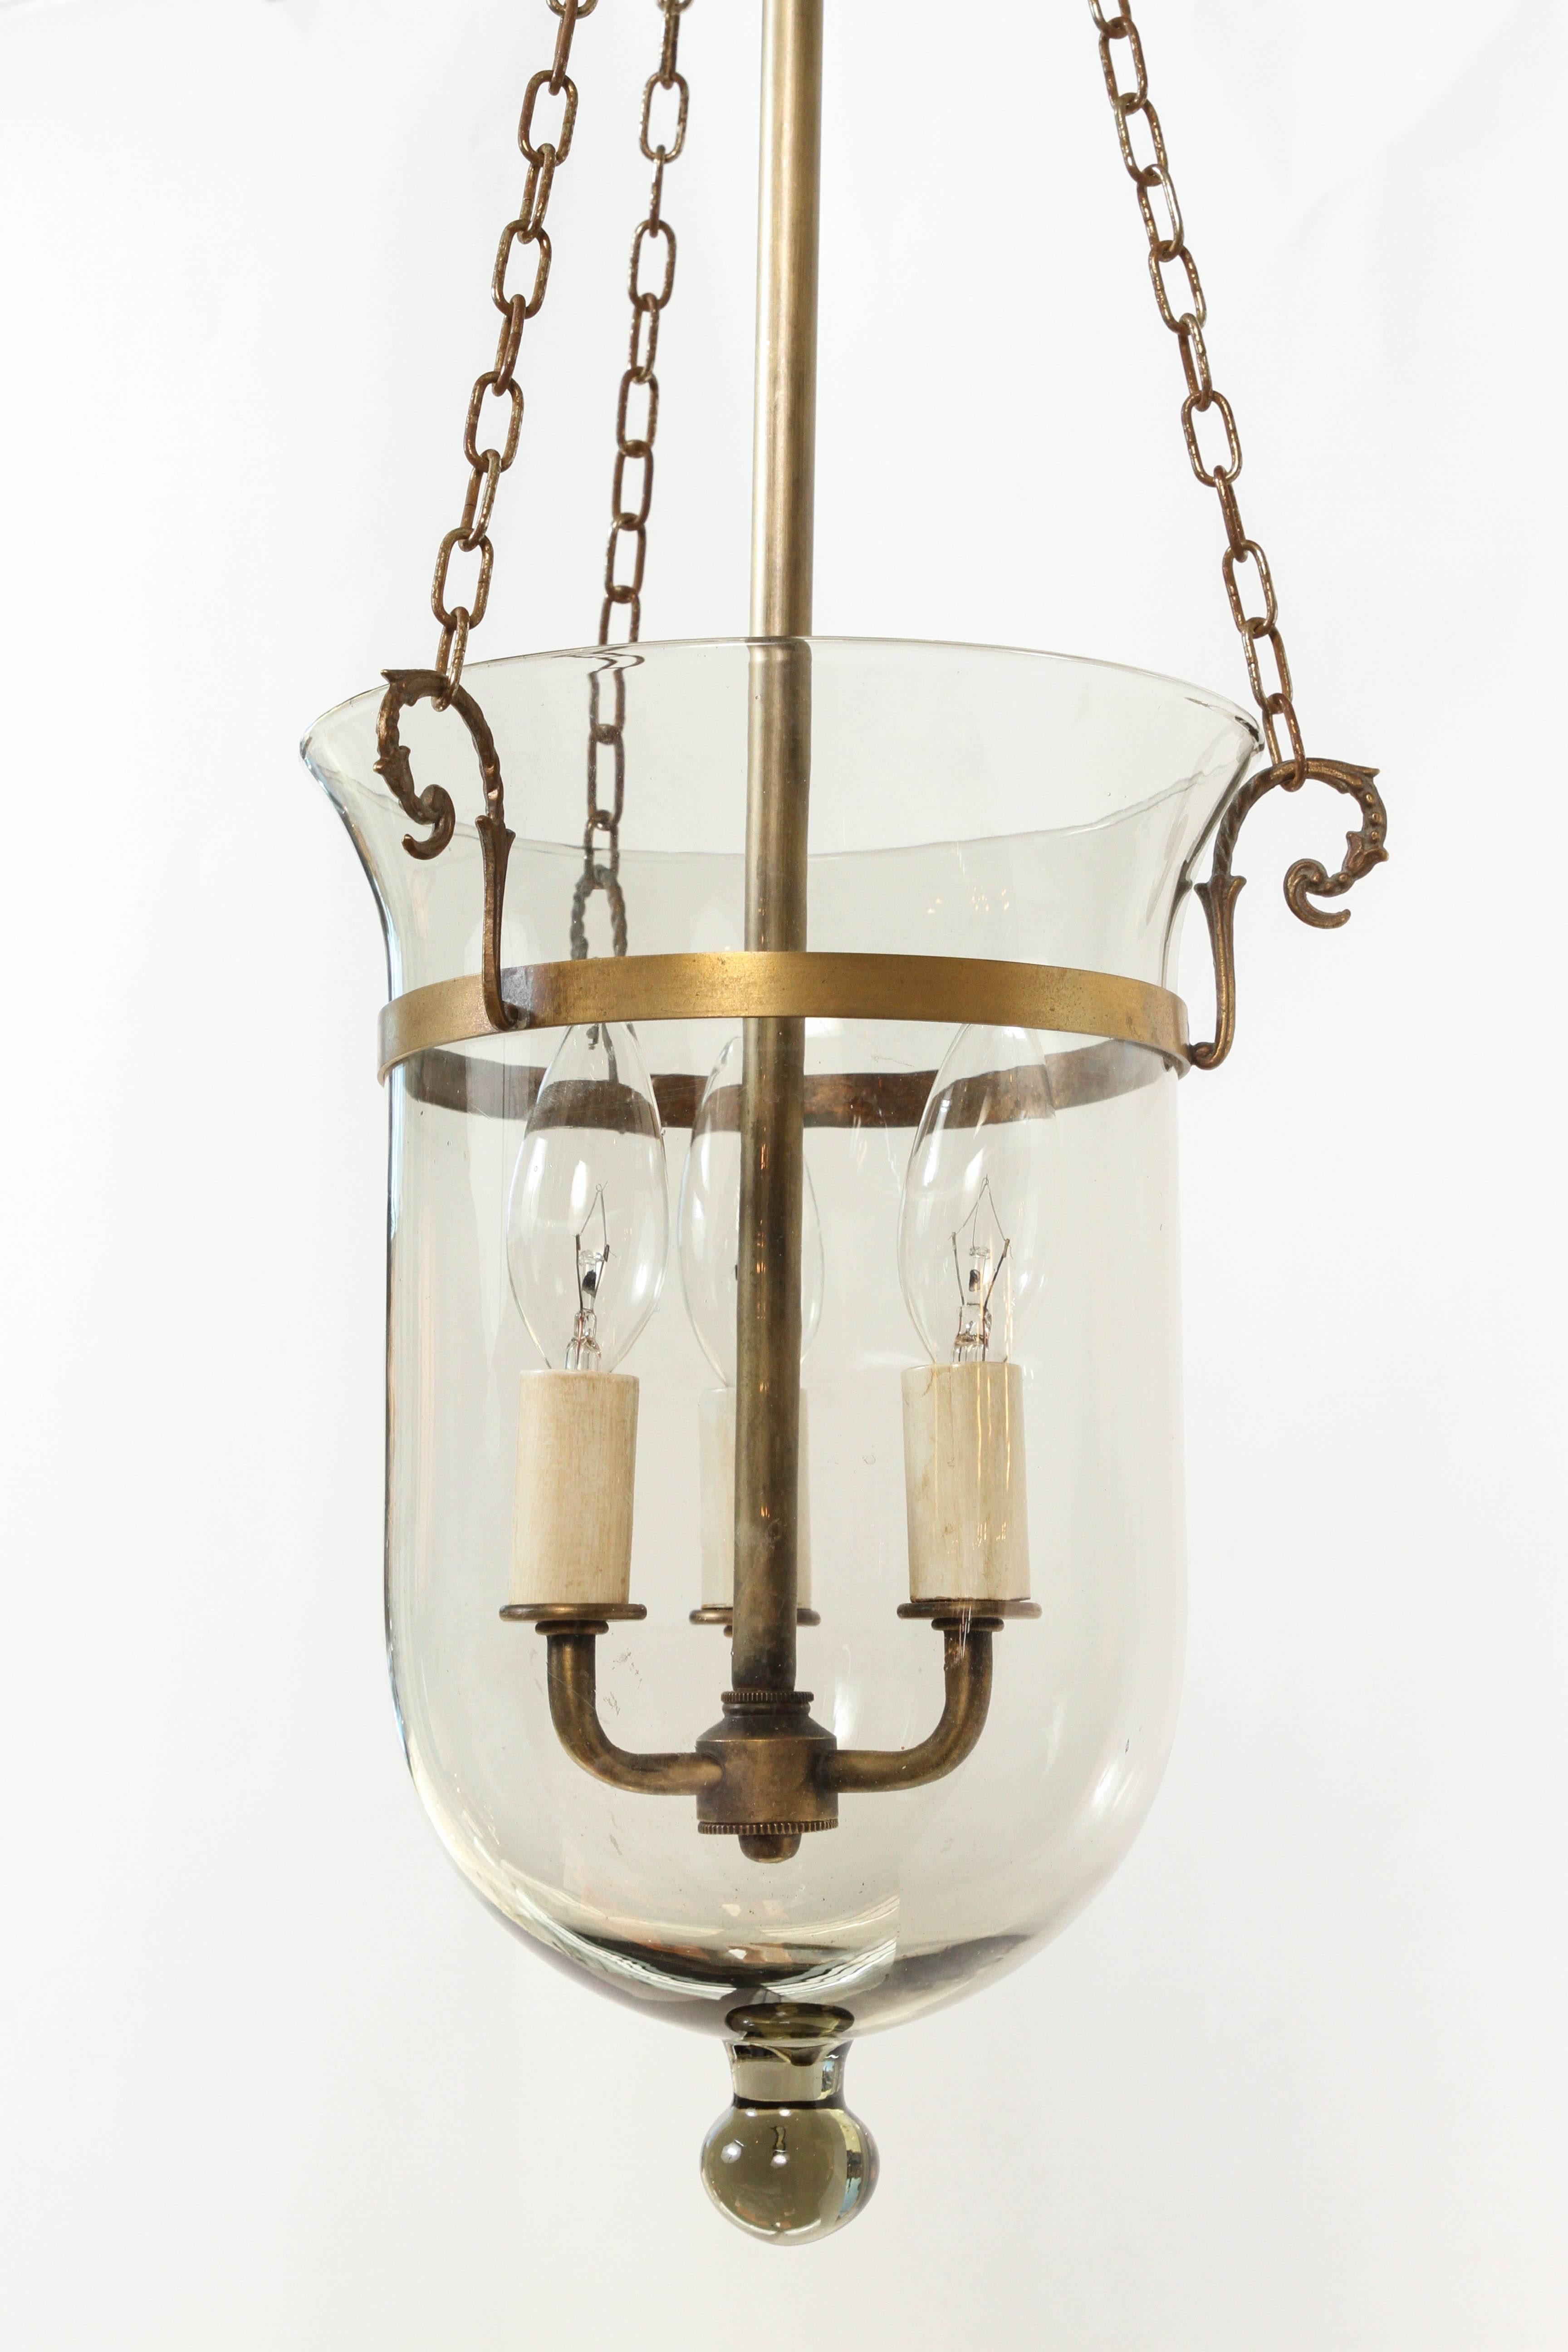 20th Century Vintage Smoke Glass Bell Jar Hanging Light with Decorative Chain, Newly Rewired